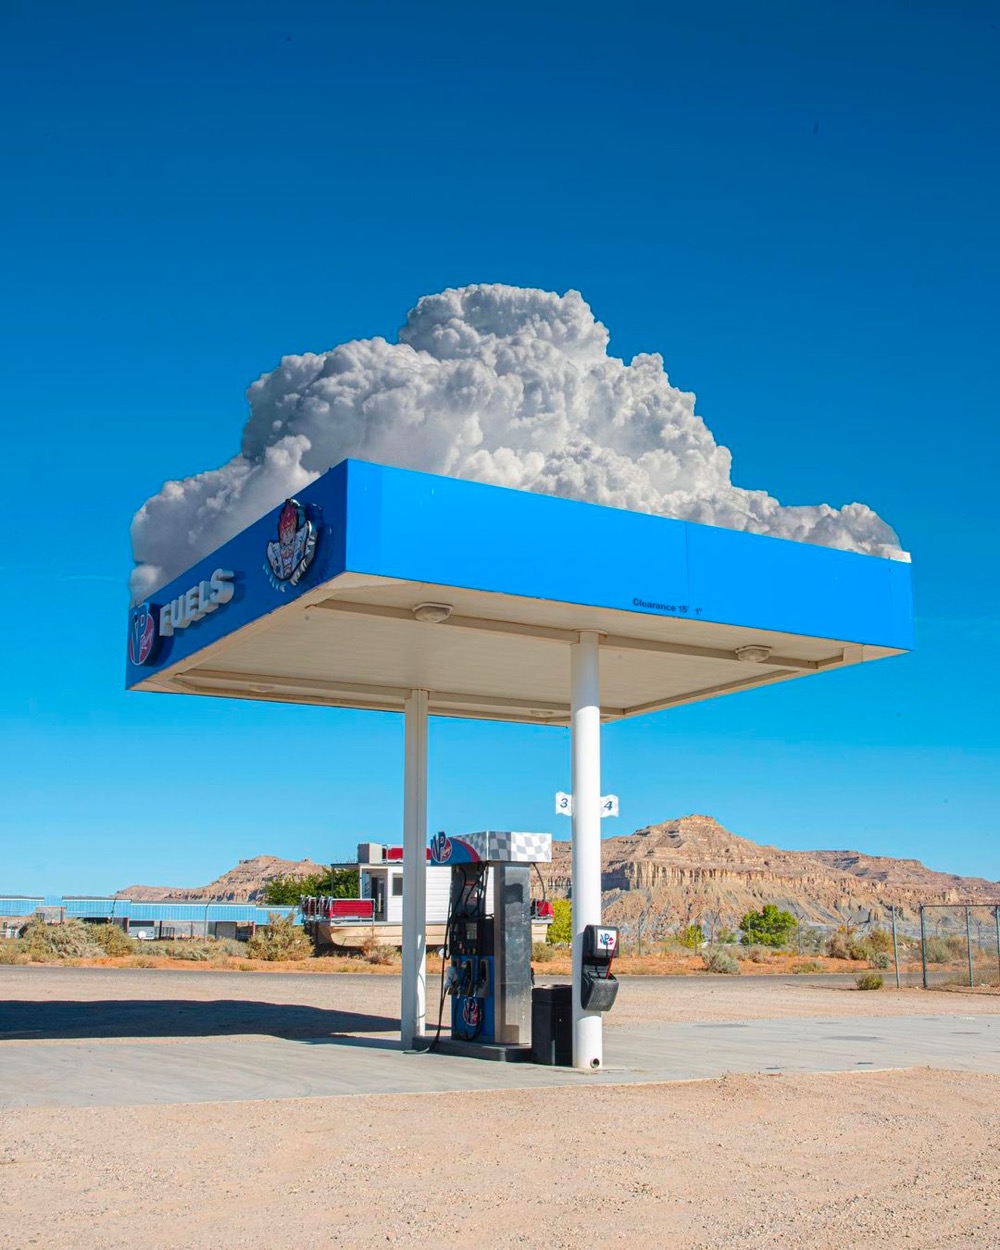 clouds appear to come out of the top of a gas station canopy